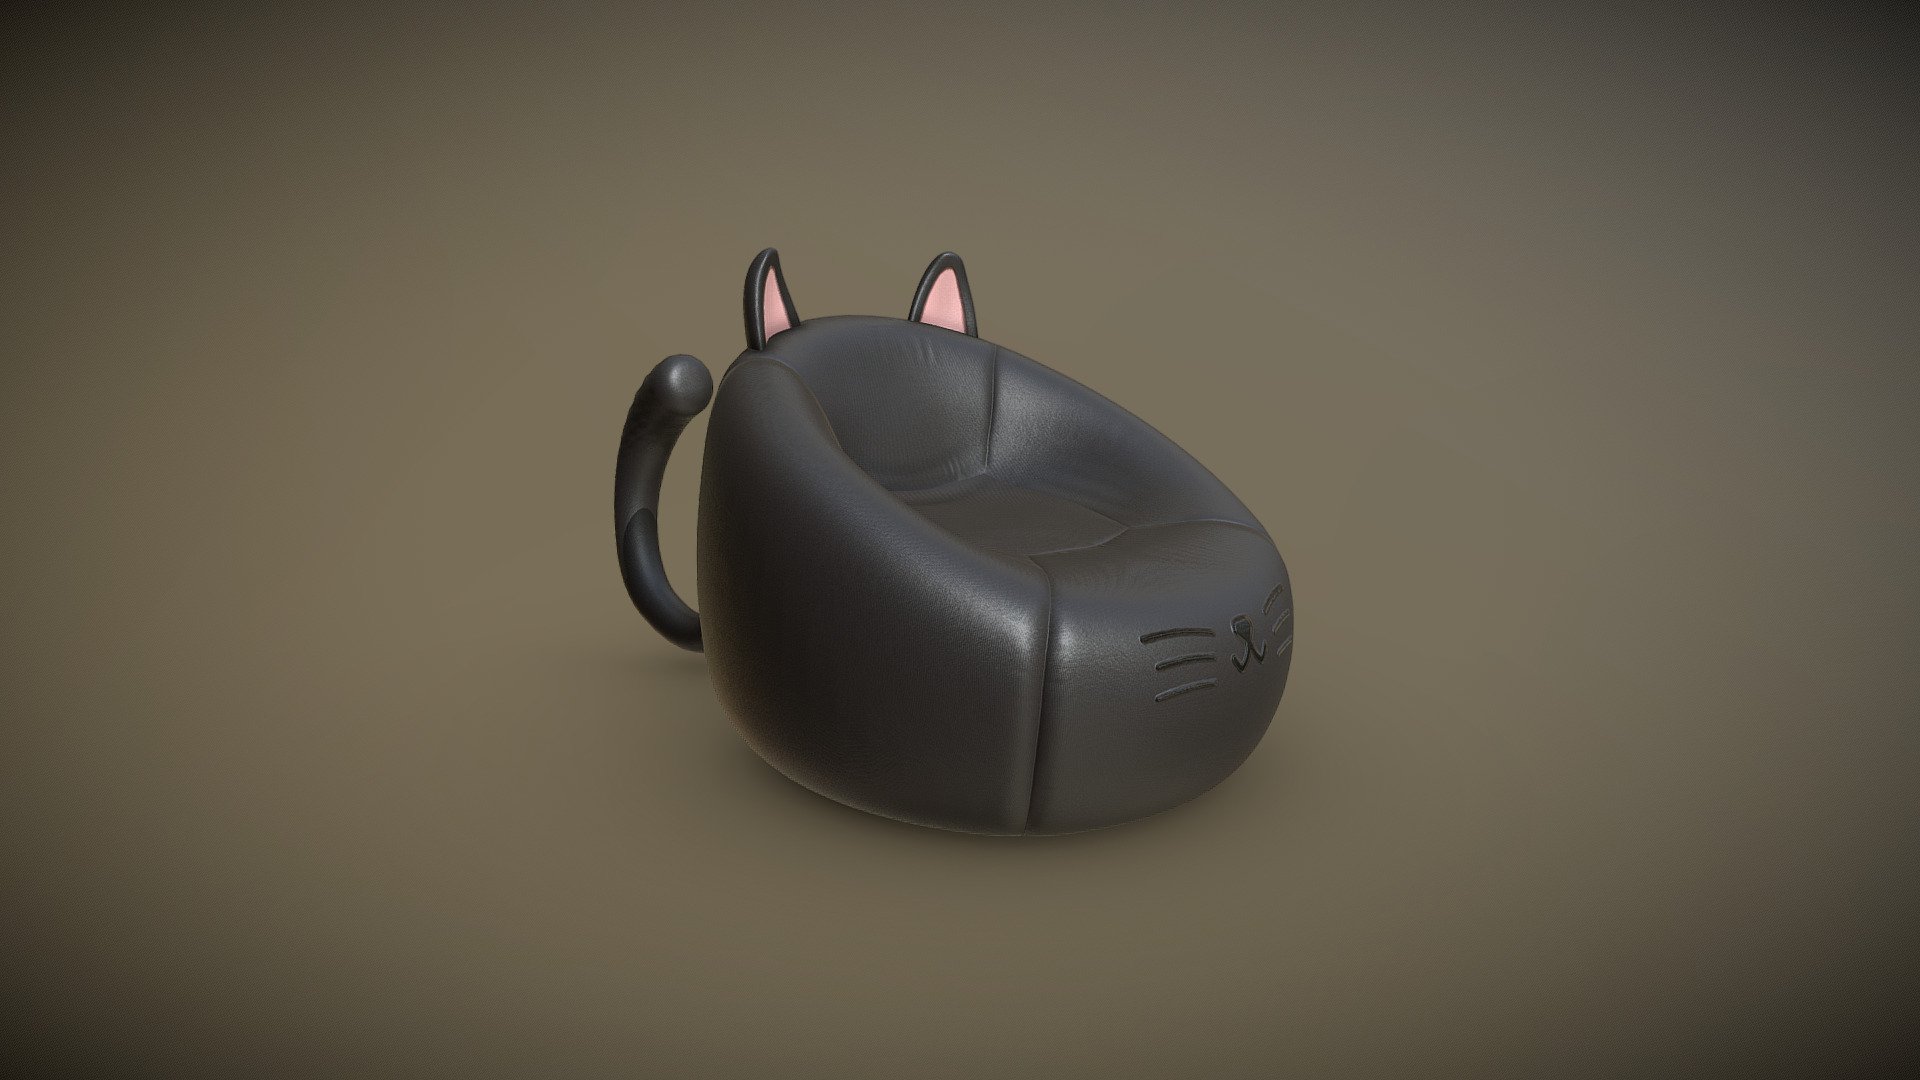 Cat beanbag

Made in Blender and textured in Substance Painter.

Used 3x 1024x1024 material slots - Cat beanbag - 3D model by wlodarski3d 3d model